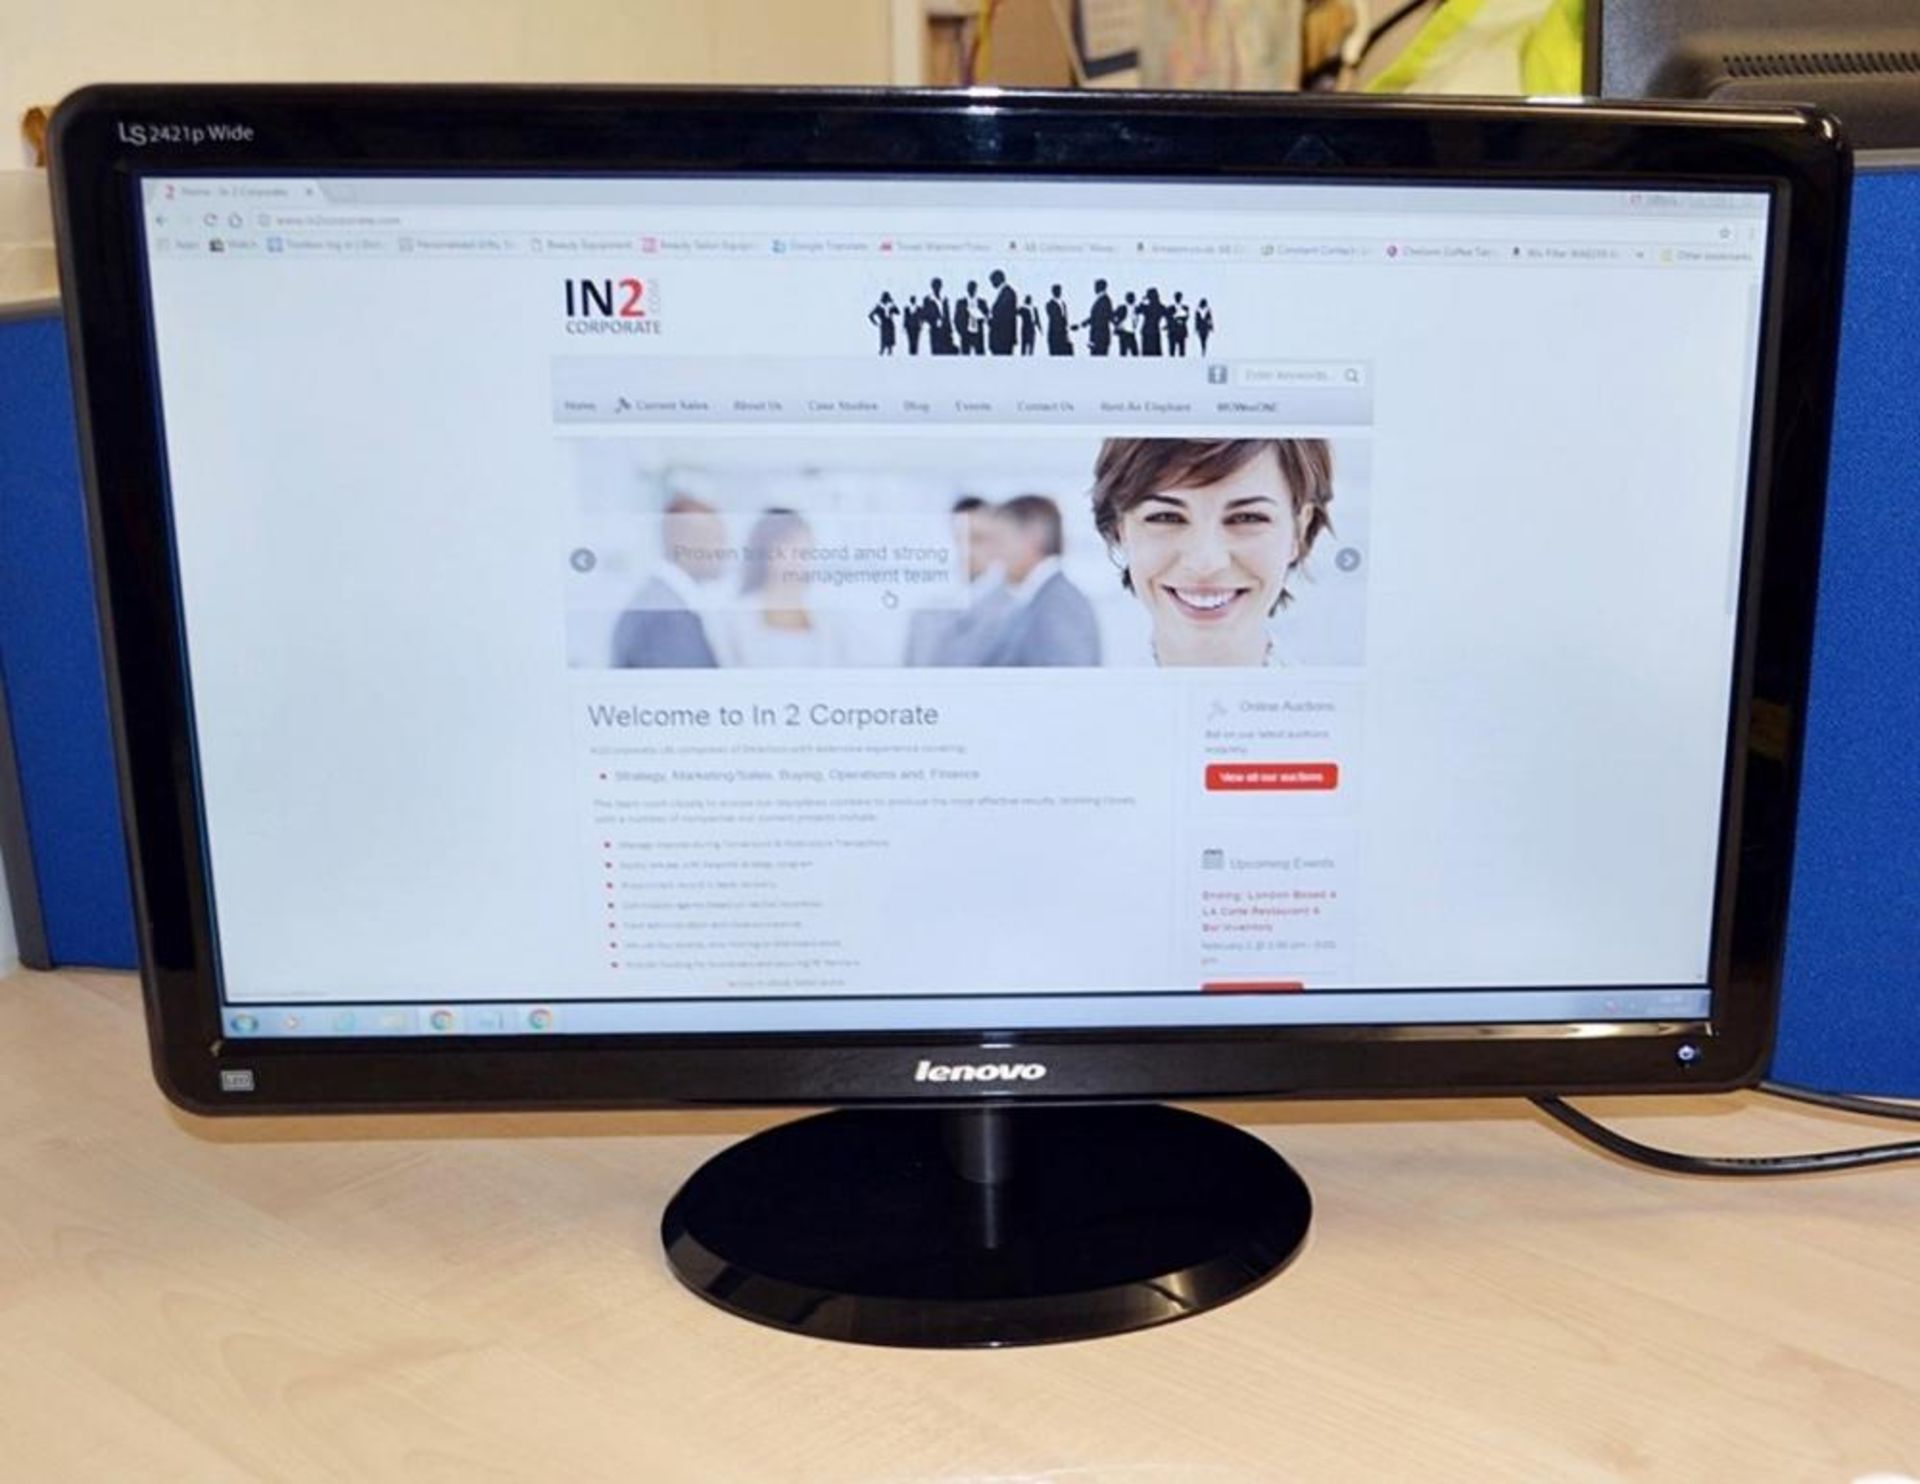 1 x Lenovo LS2421p Wide 23.6" Full HD LED TFT Monitor (Model: 4015-LS1) - Recently Taken From A Work - Image 14 of 14